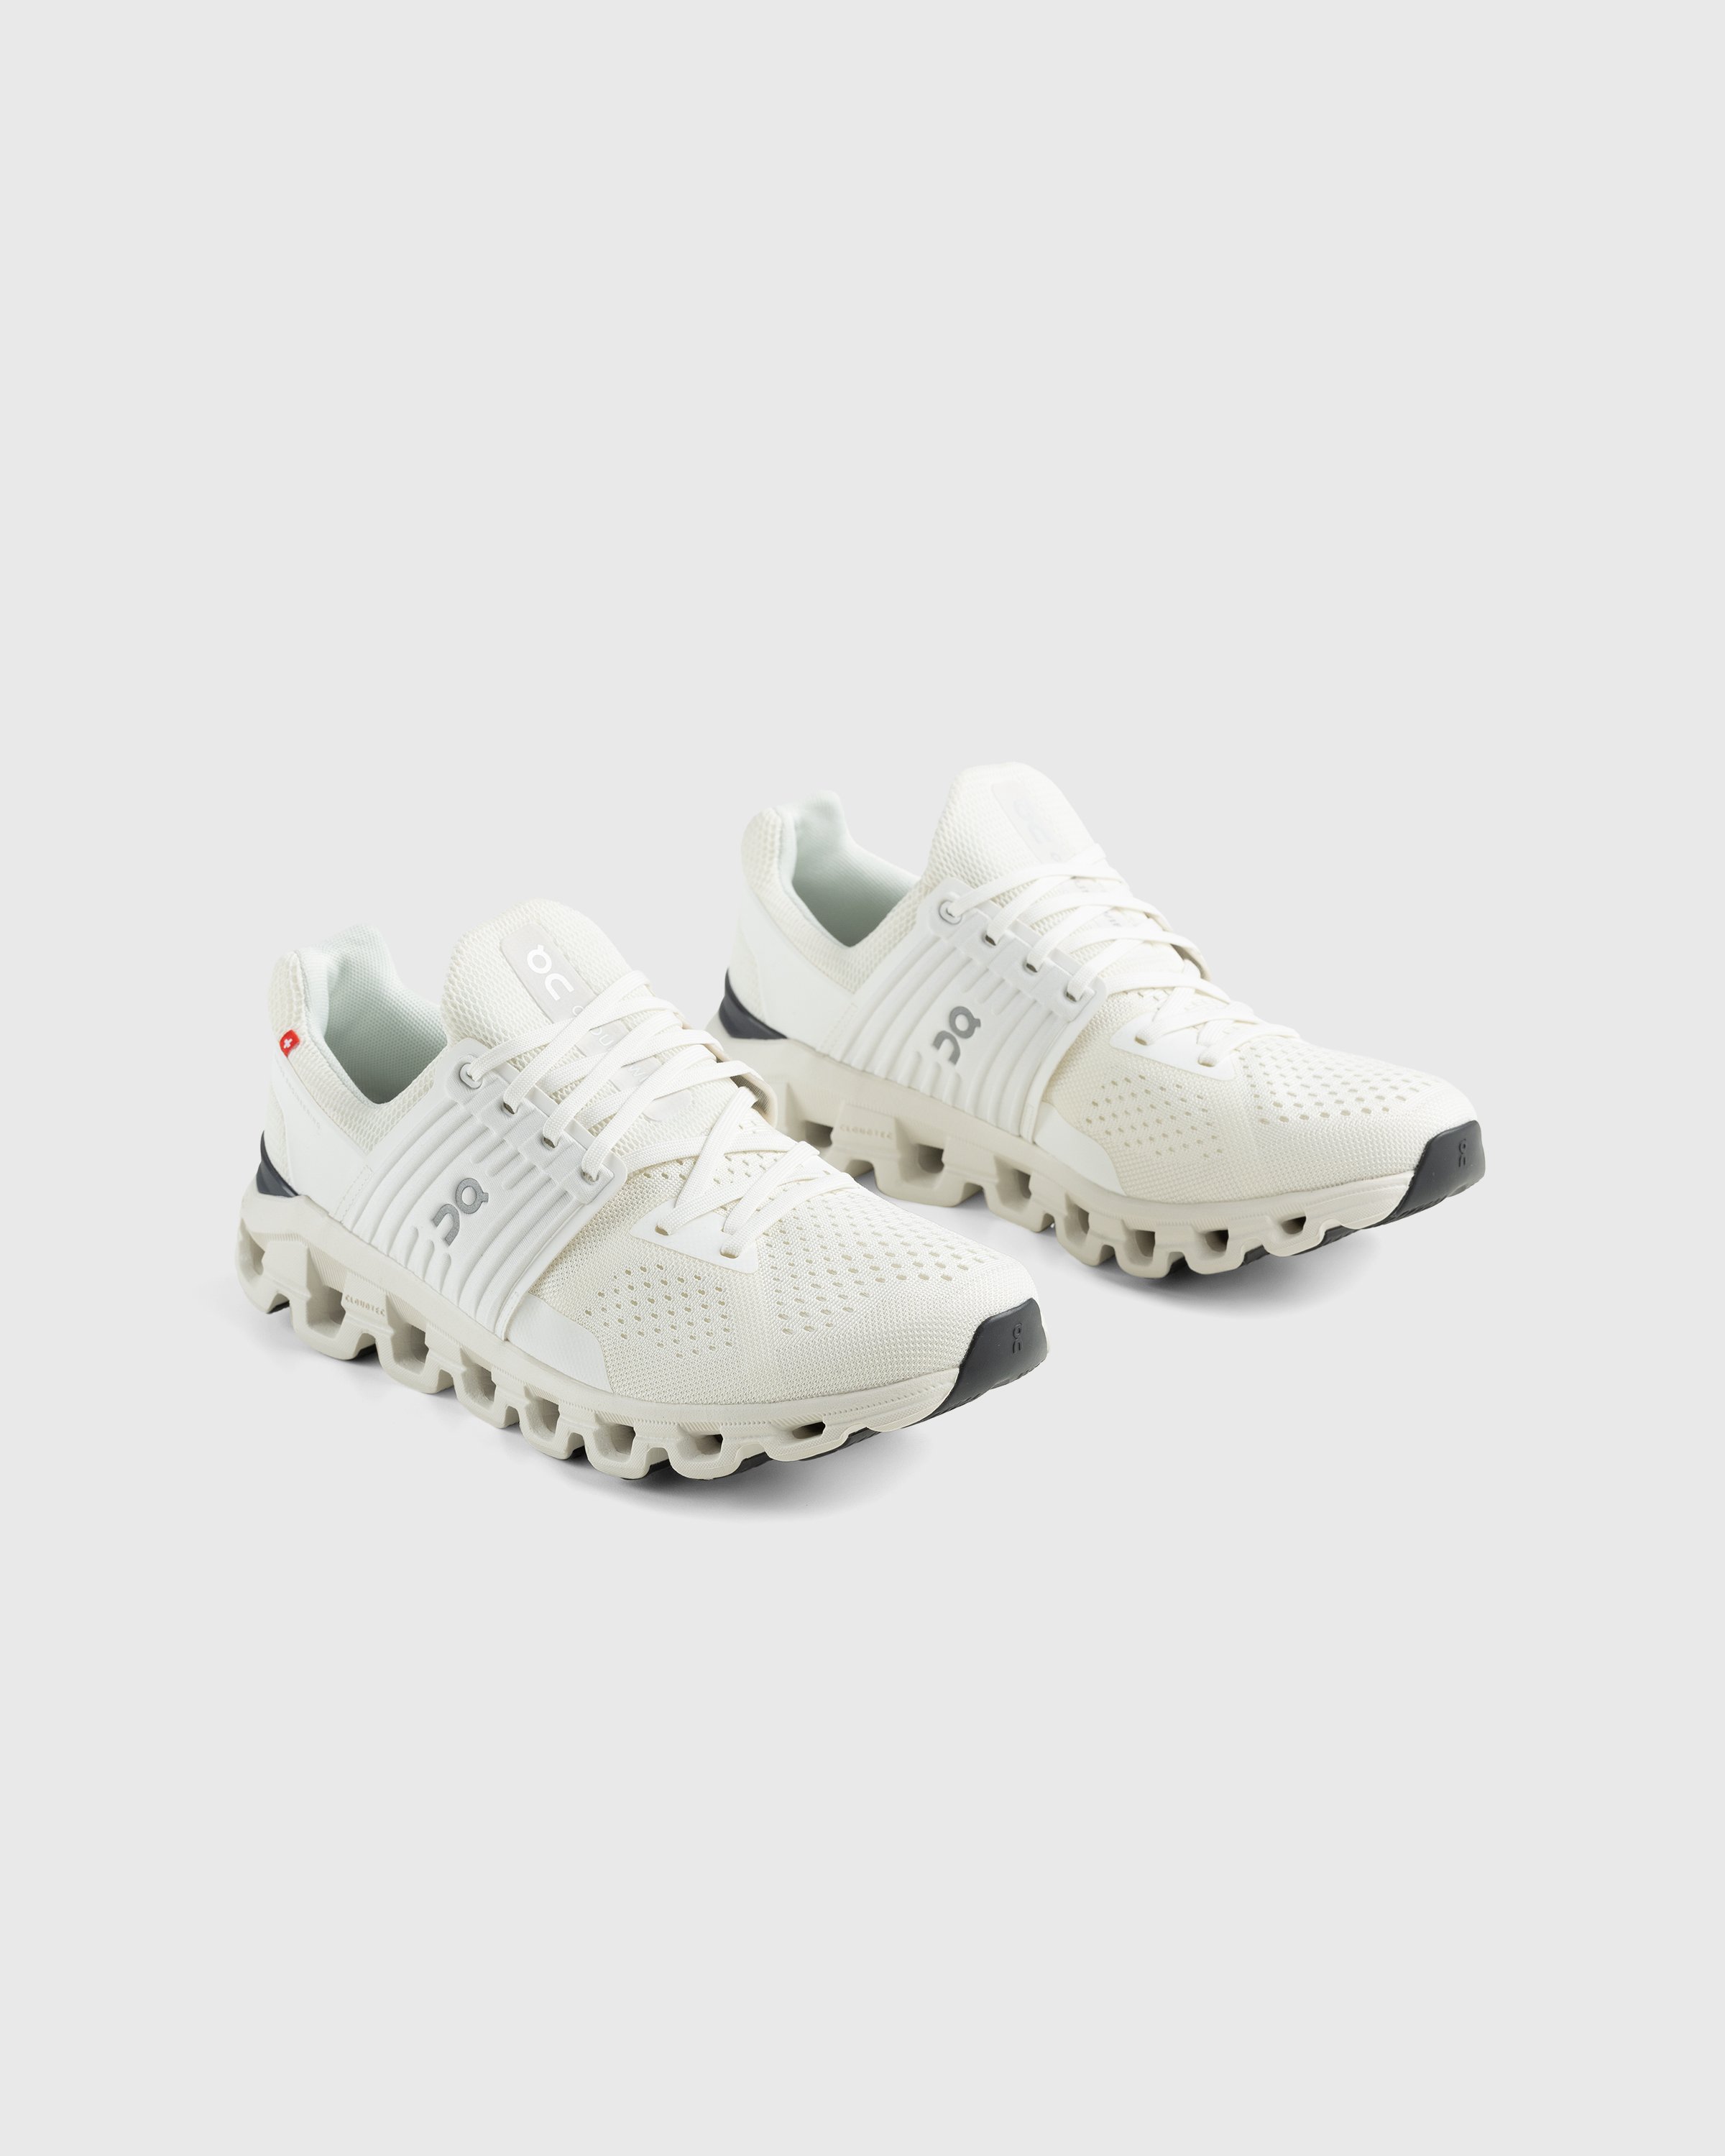 On - Cloudswift All White - Footwear - White - Image 3